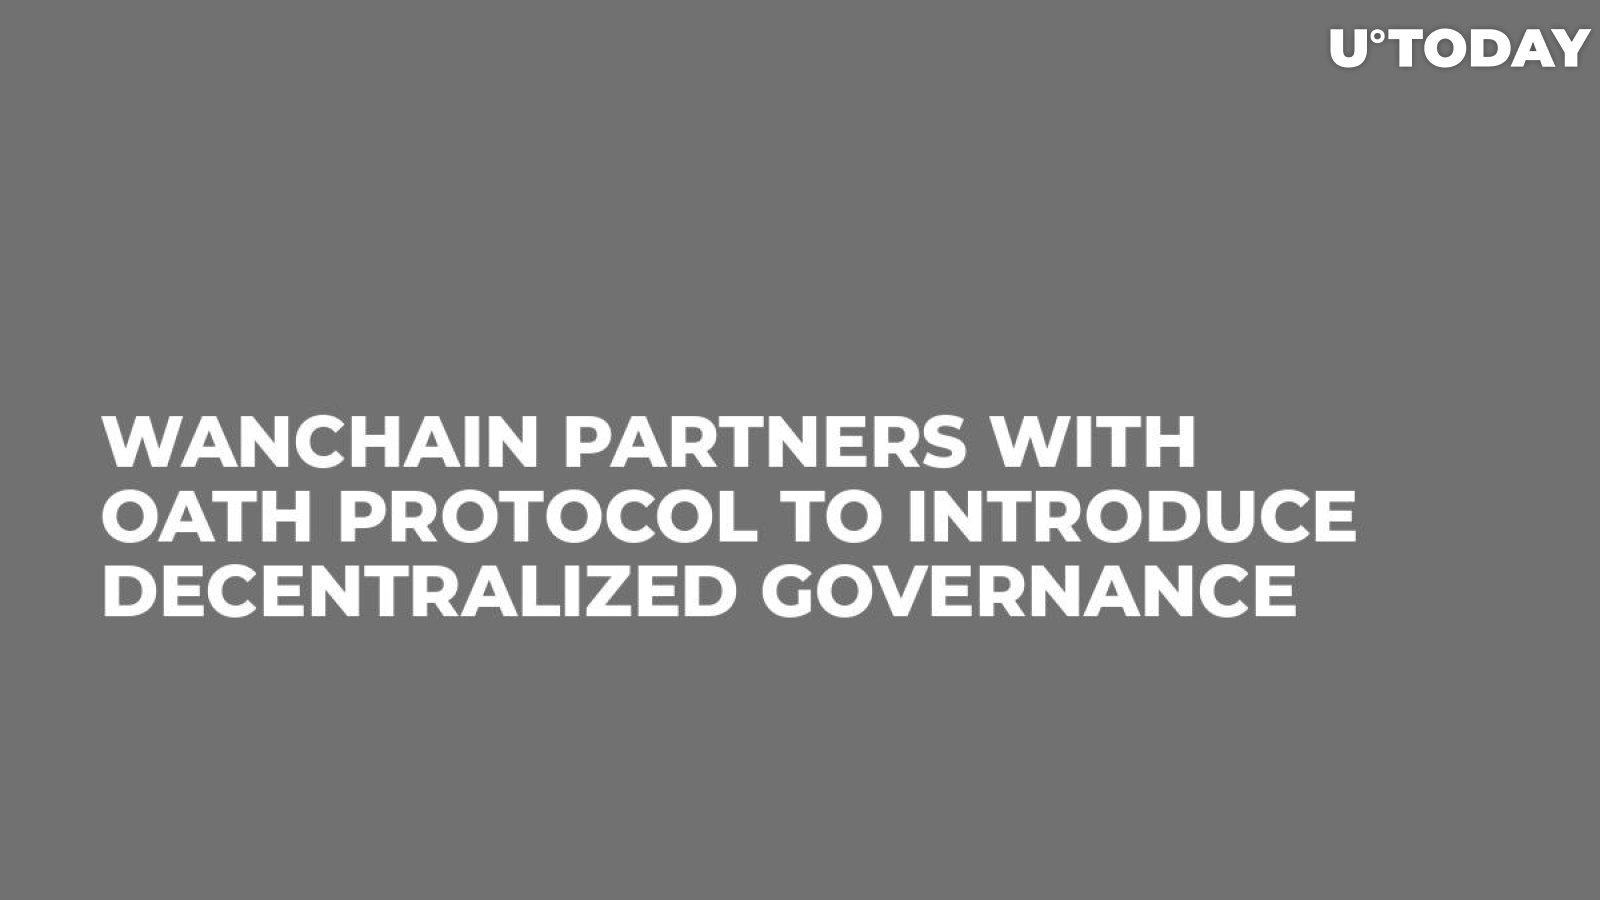 Wanchain Partners with Oath Protocol to Introduce Decentralized Governance